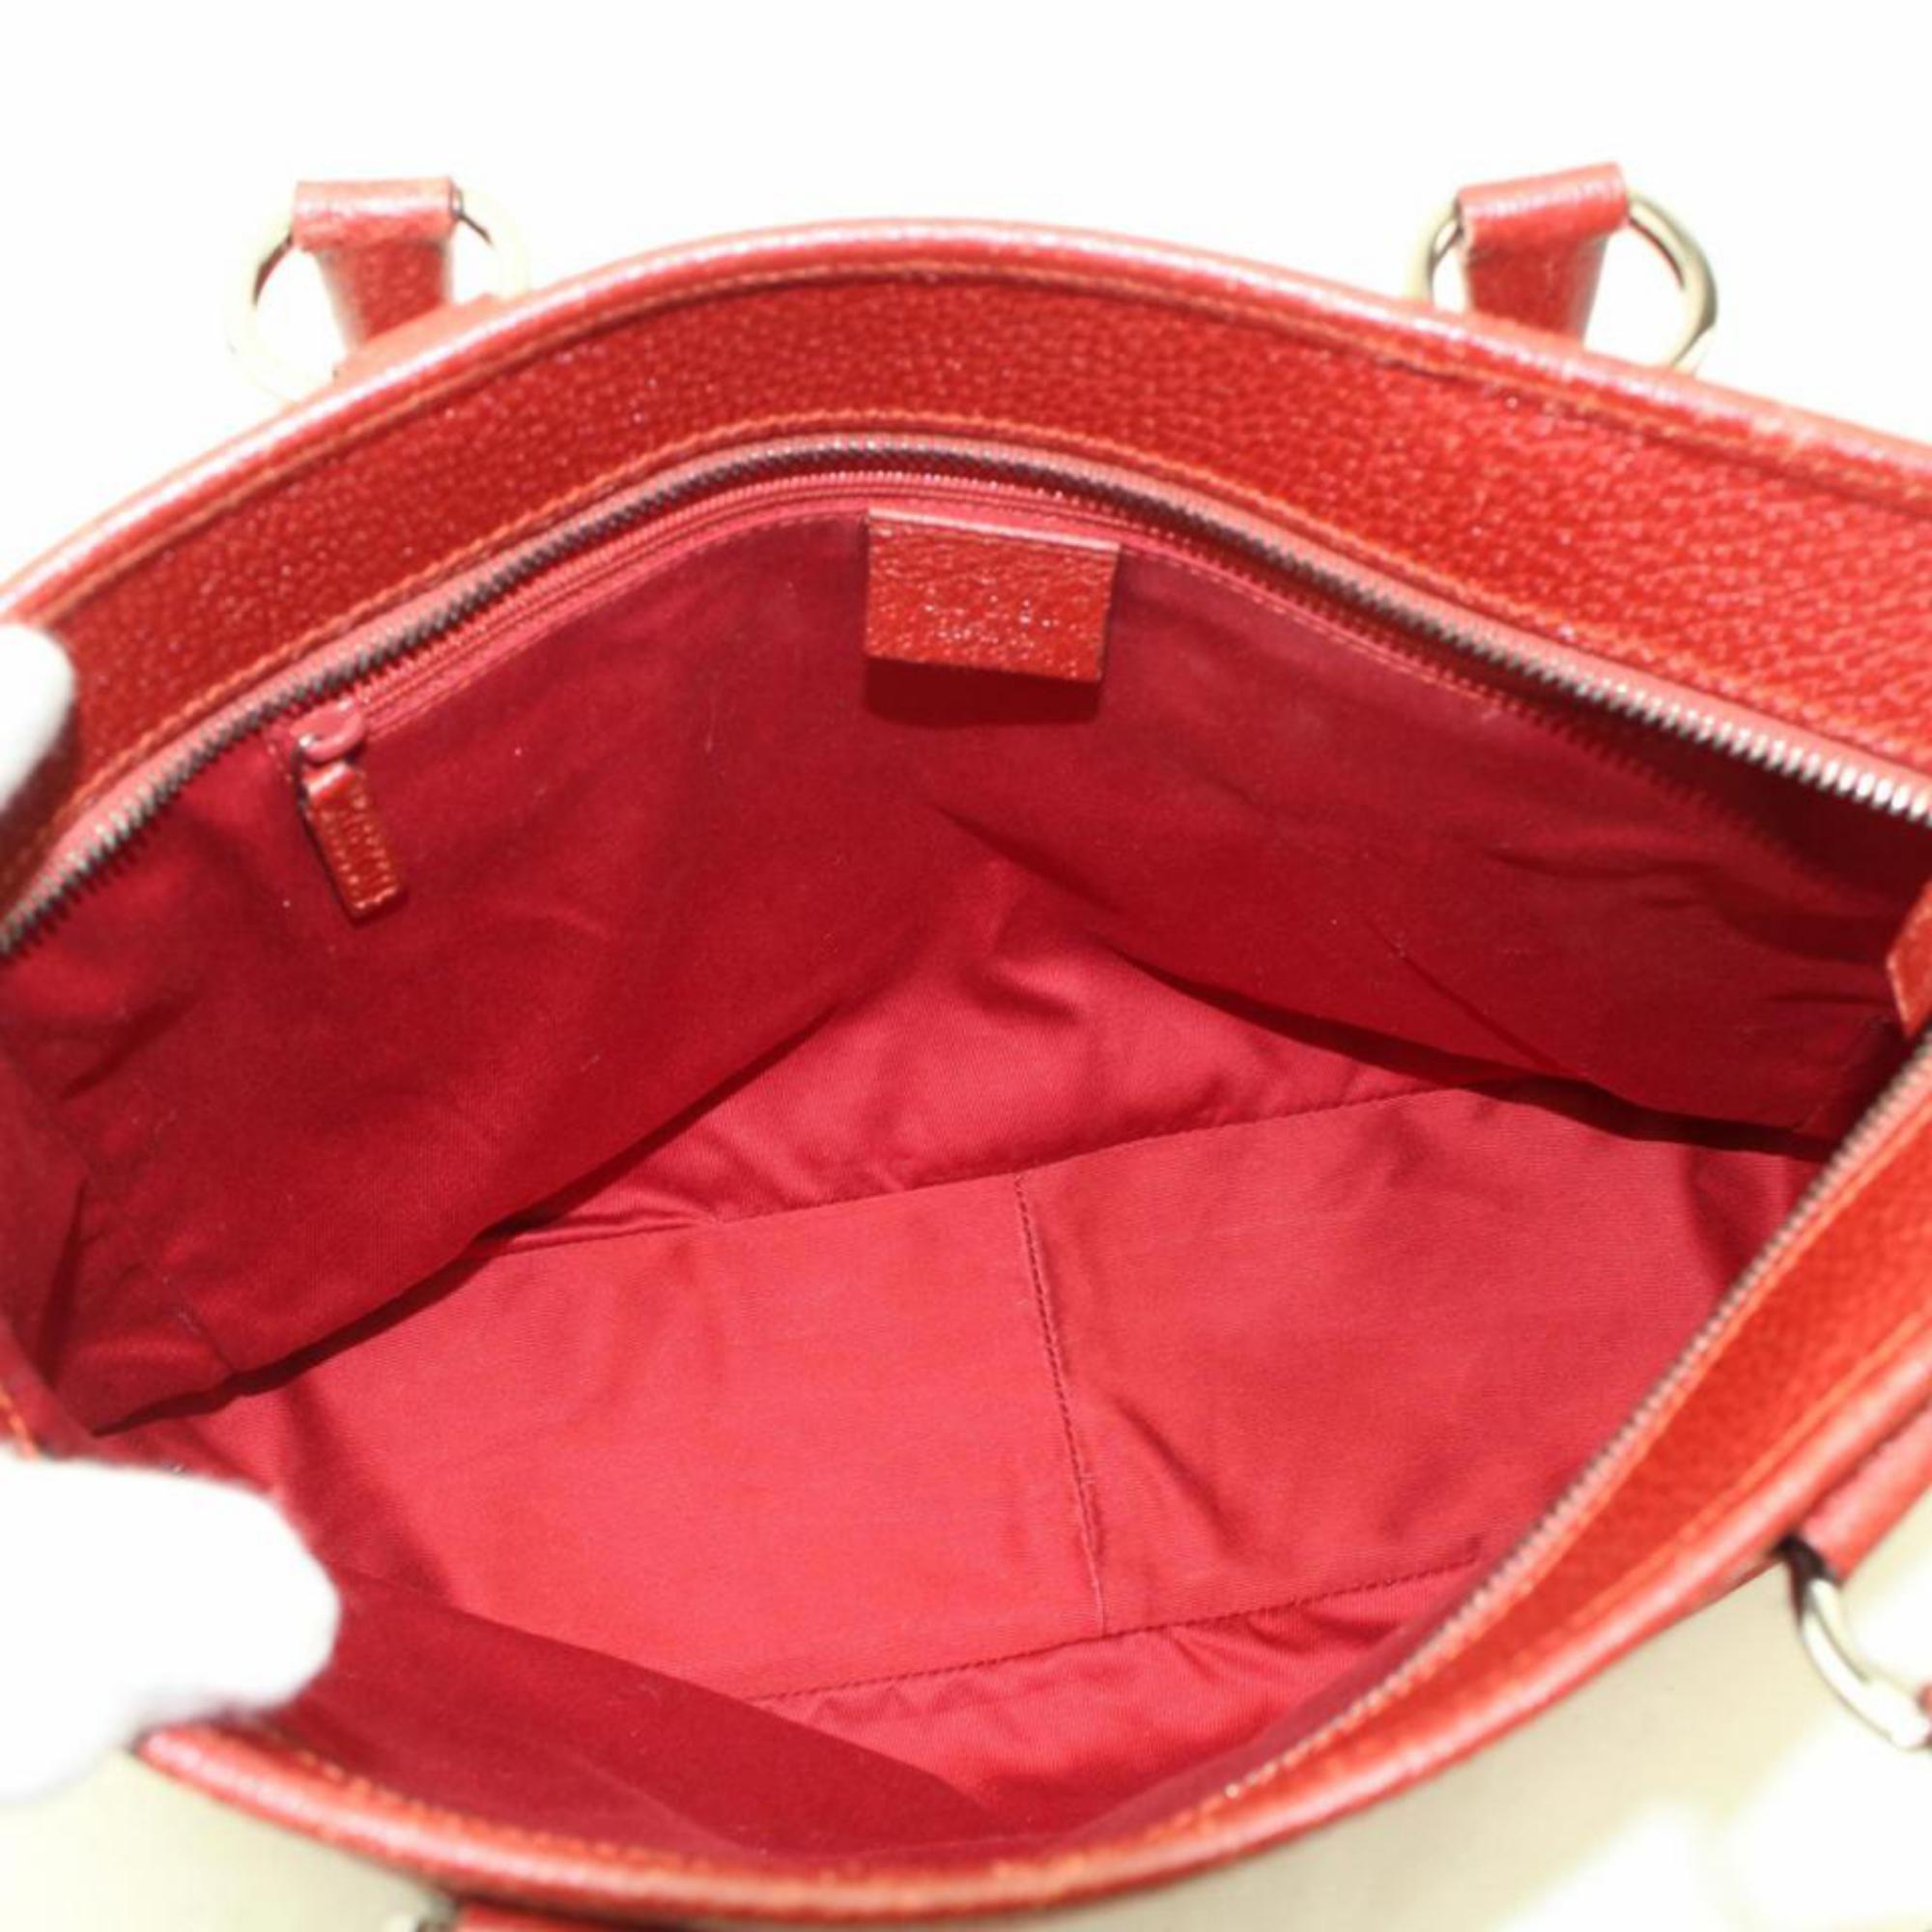 Gucci Monogram Shopper 869897 Red Canvas Tote In Excellent Condition For Sale In Forest Hills, NY